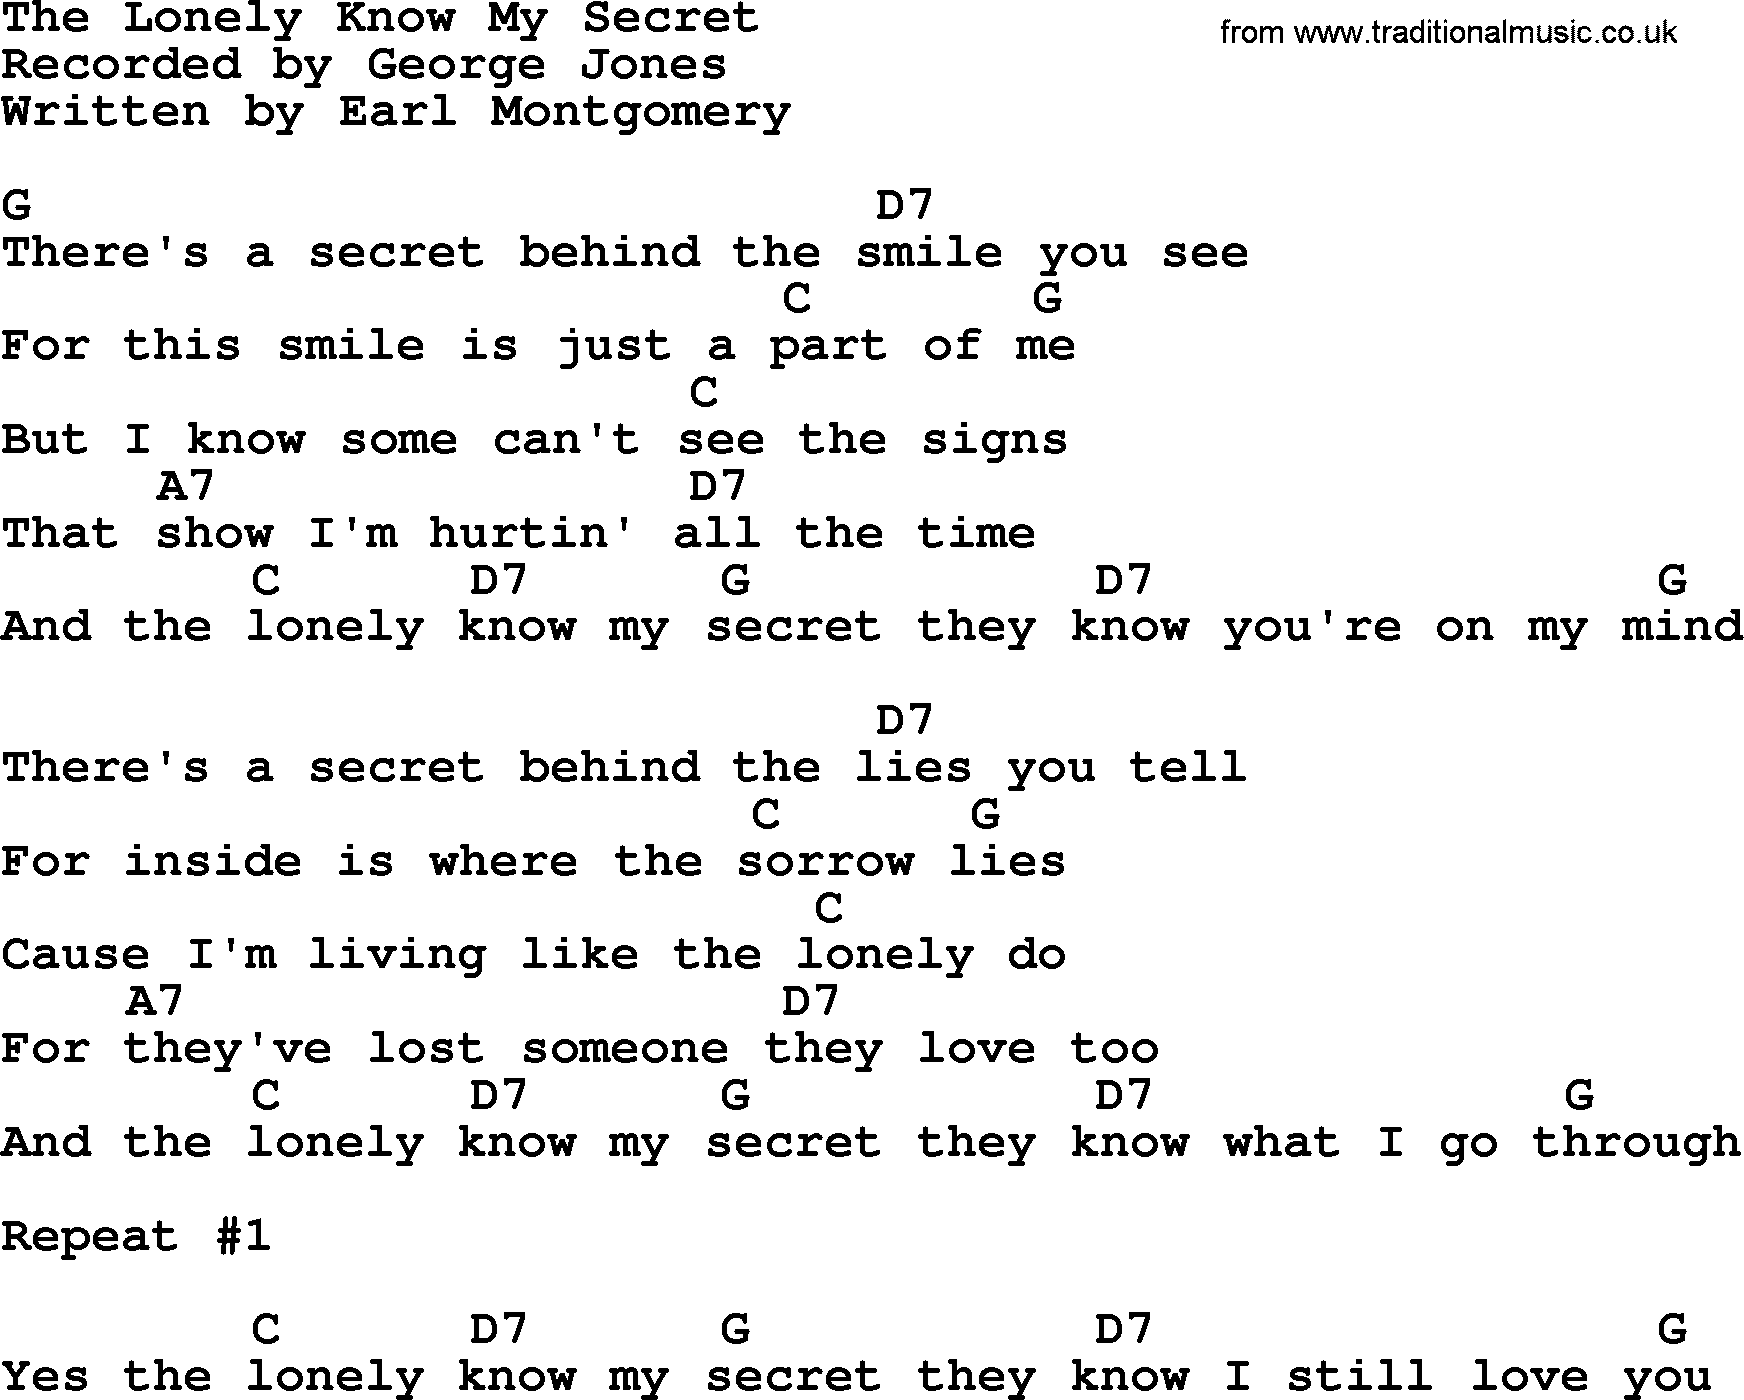 George Jones song: The Lonely Know My Secret, lyrics and chords